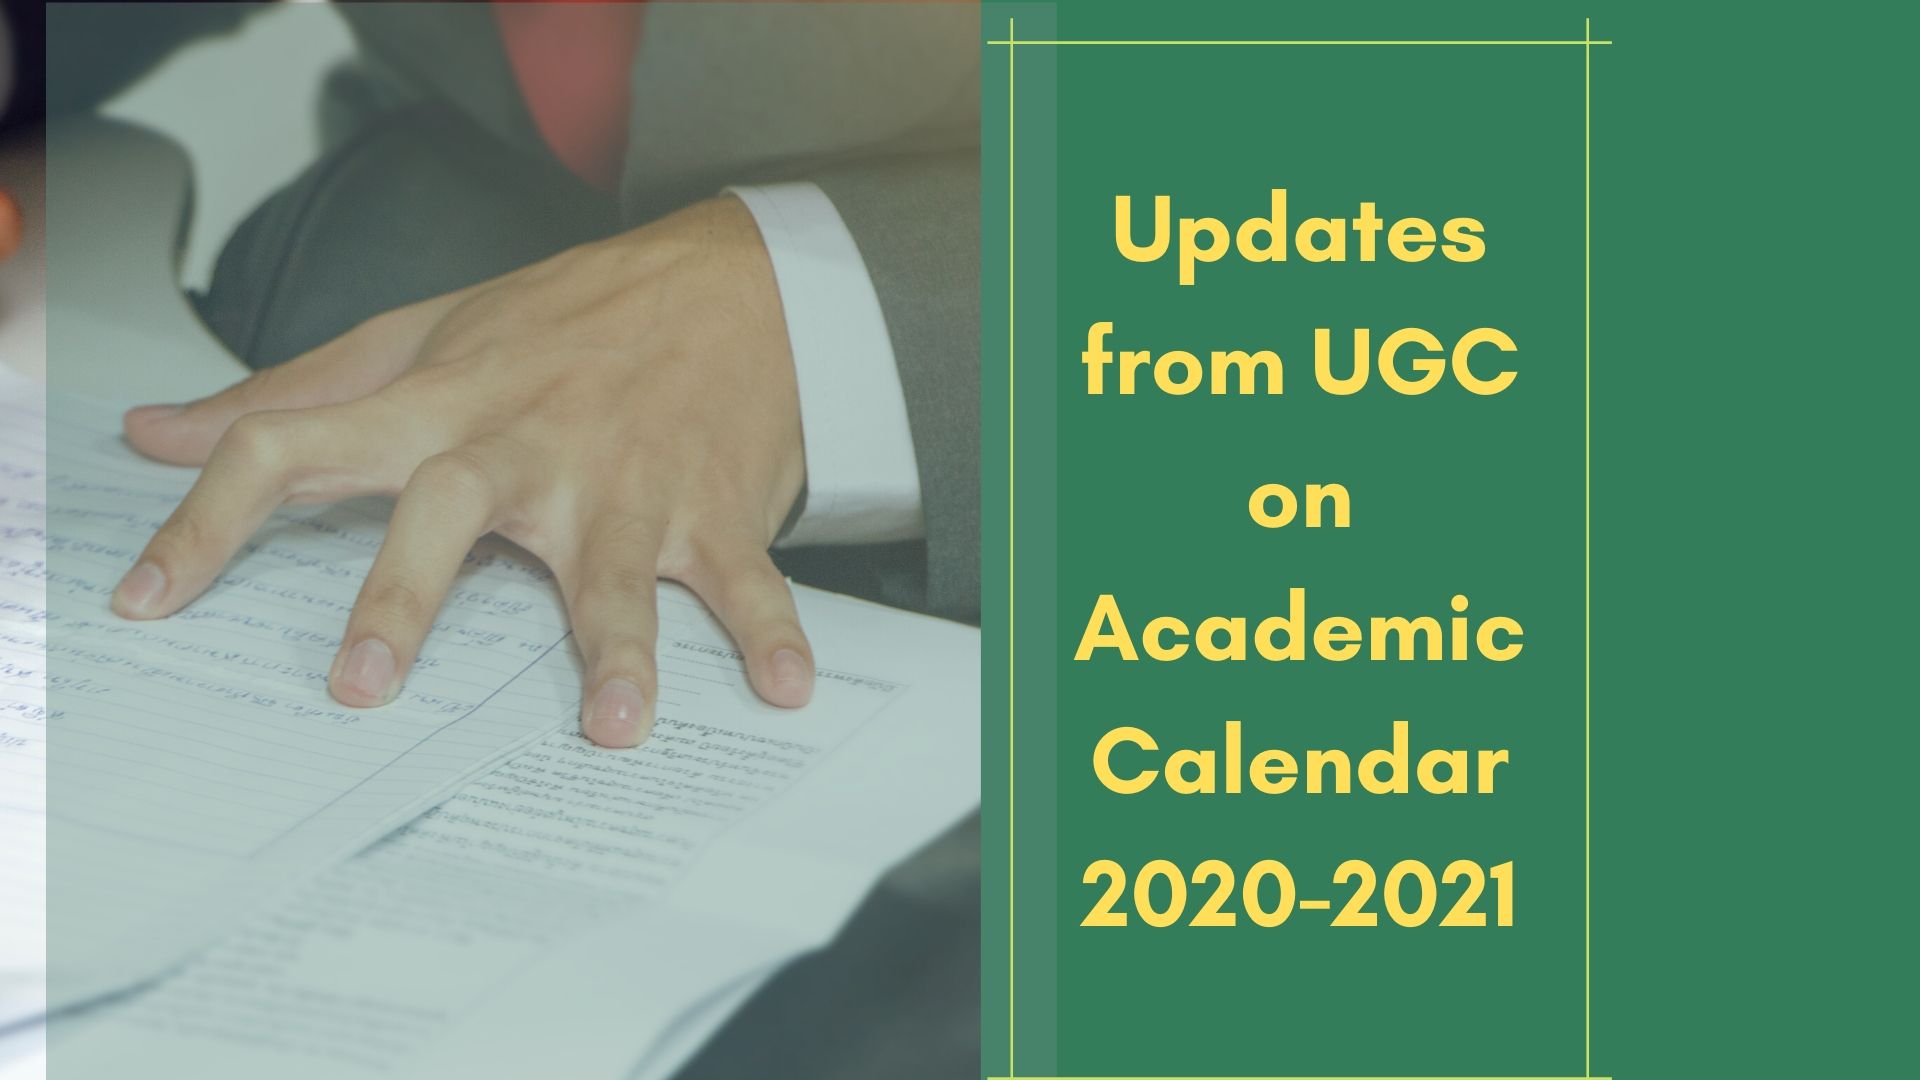 Academic Calendar 2021 and other Updates from UGC